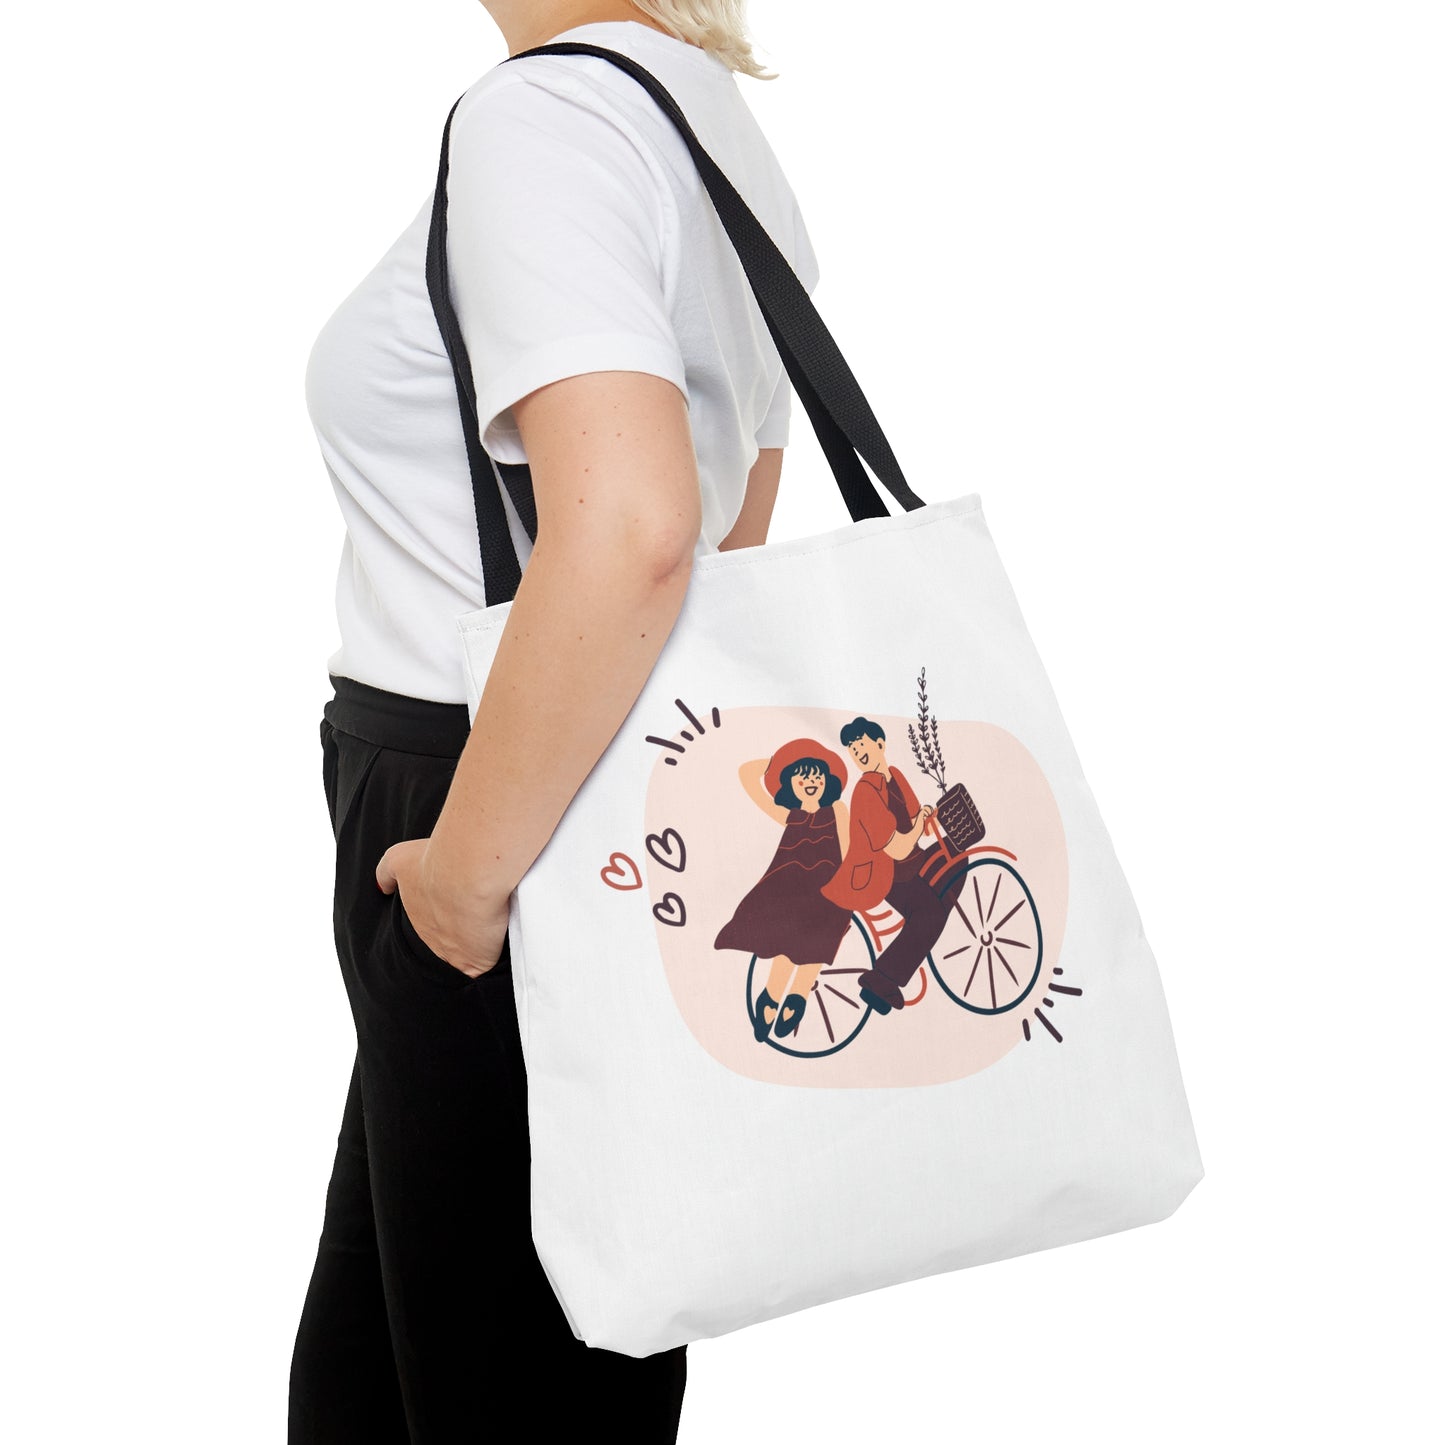 Beautiful Couple on Bike Printed Tote Bag, Reusable Tote Bag for Valentine's Day